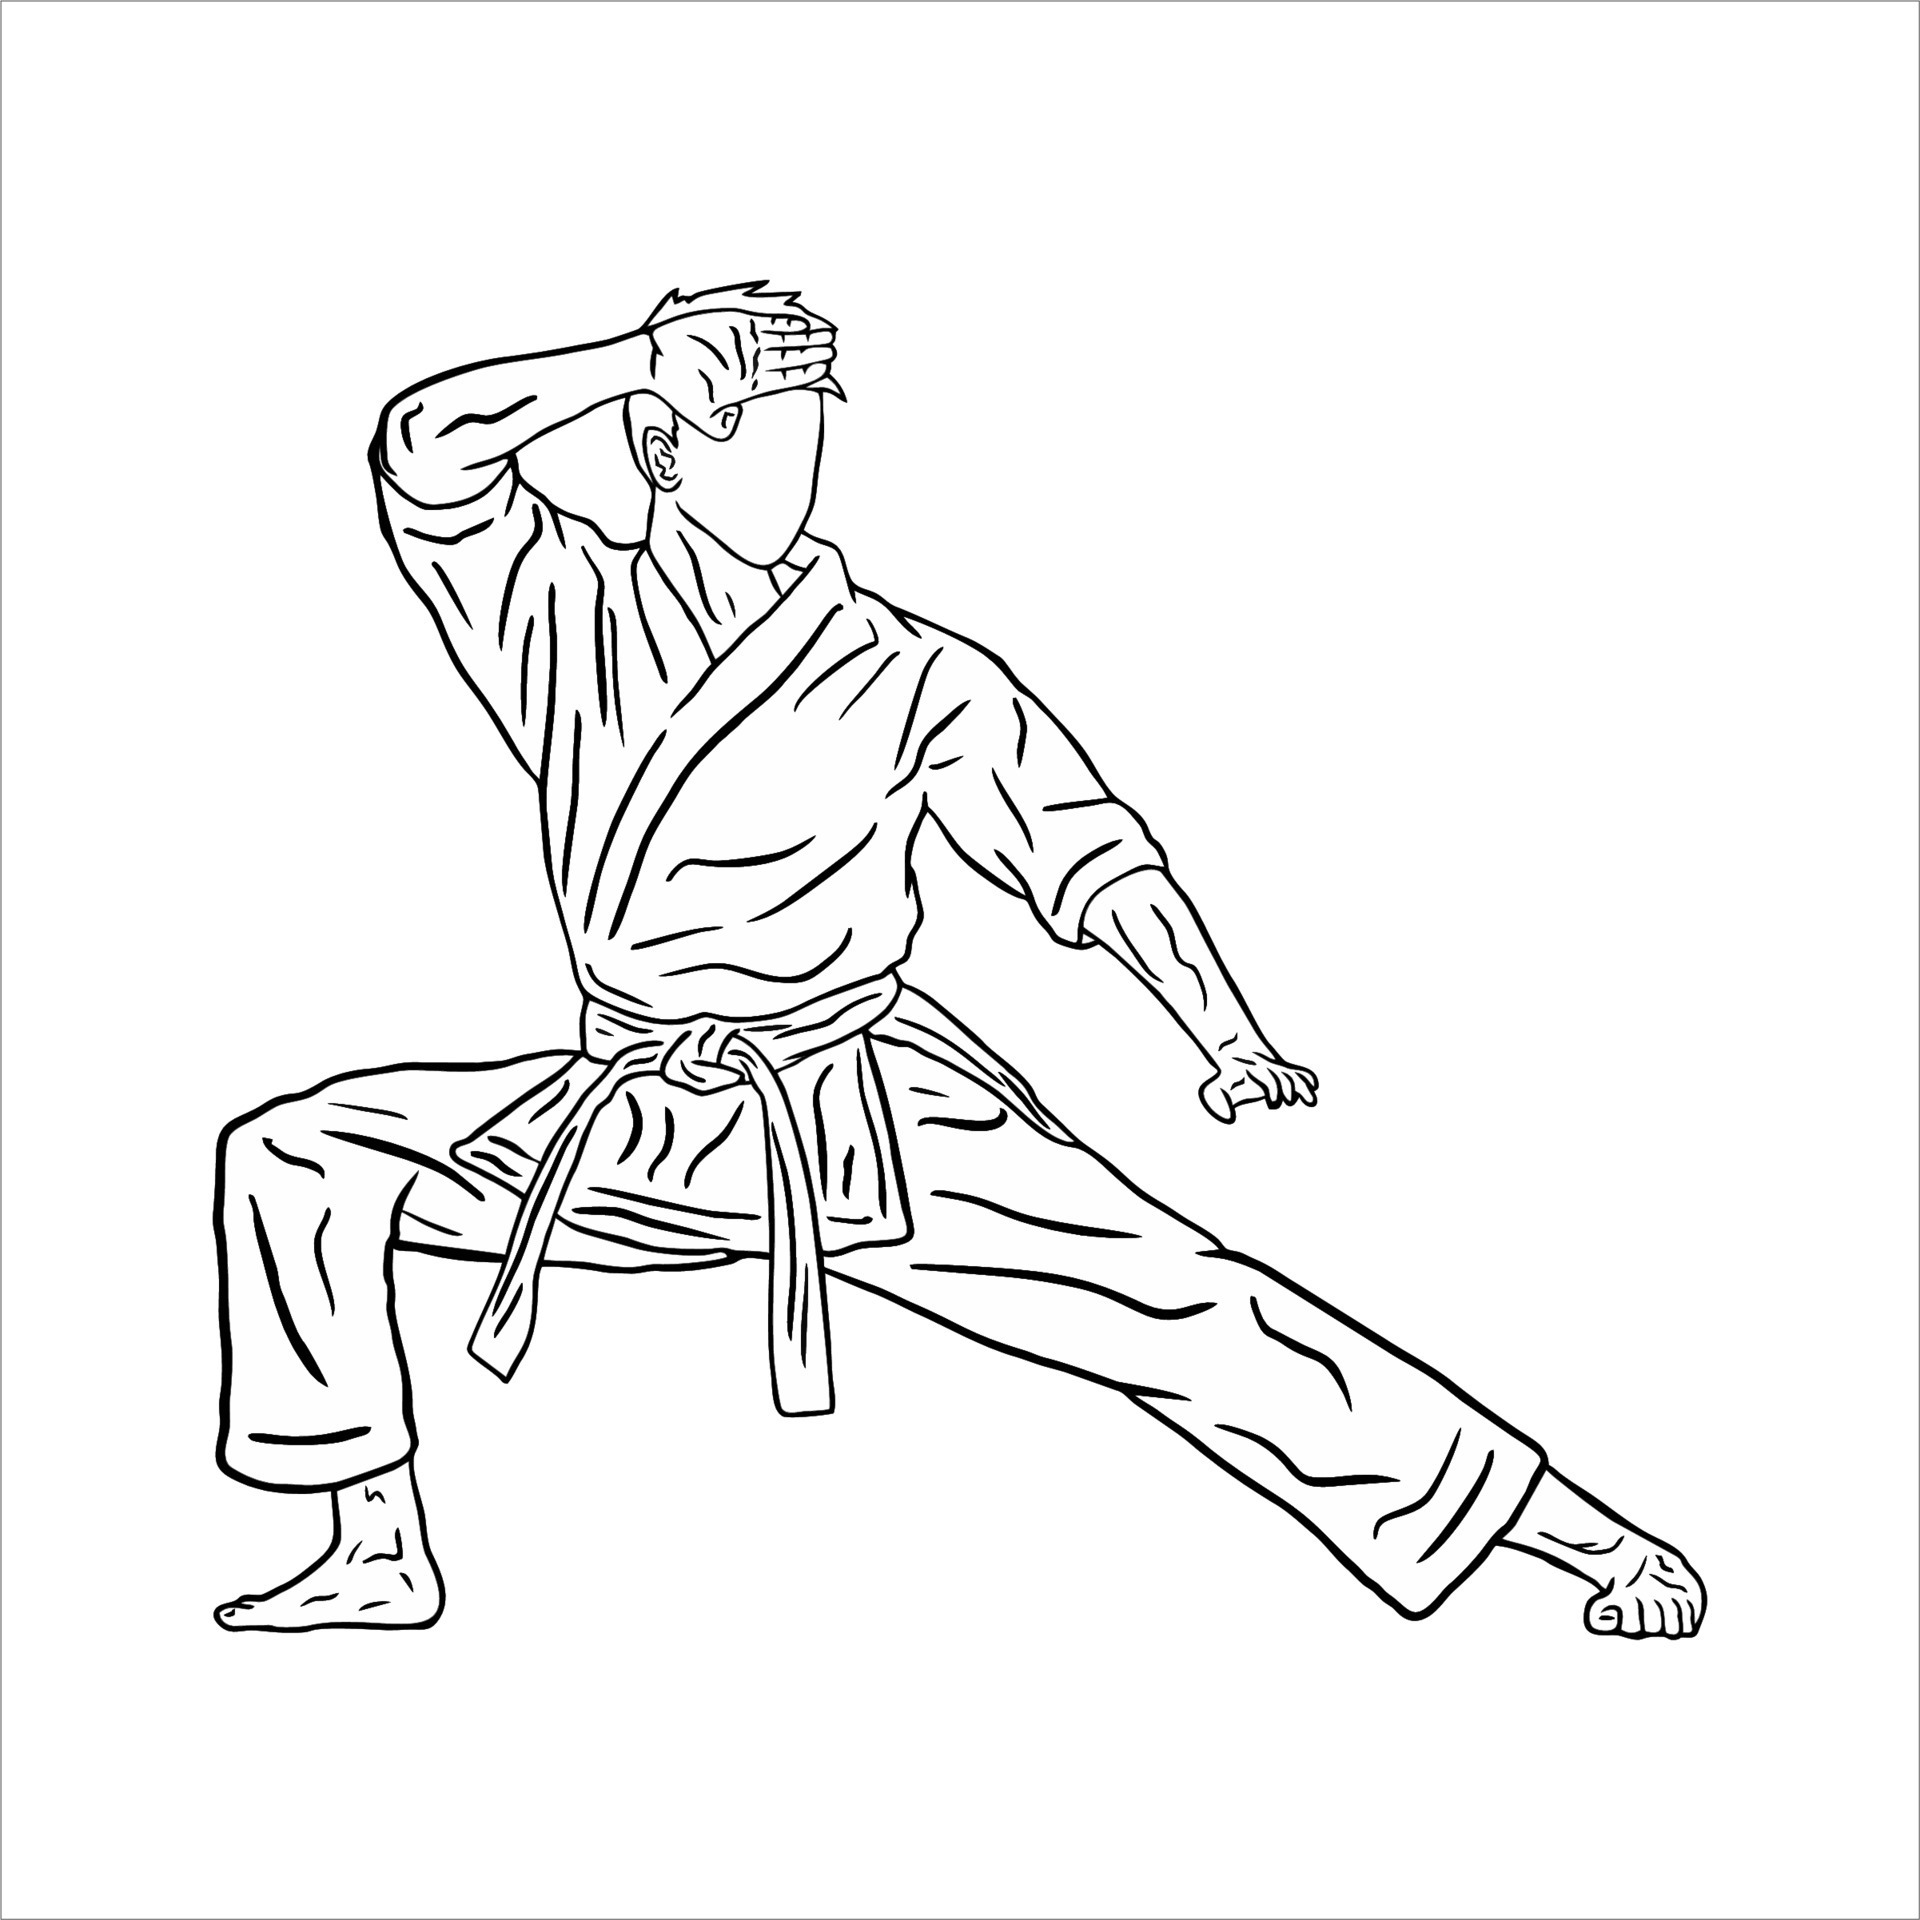 Karate kick and poses of karate techniques. Martial arts. This vector ...